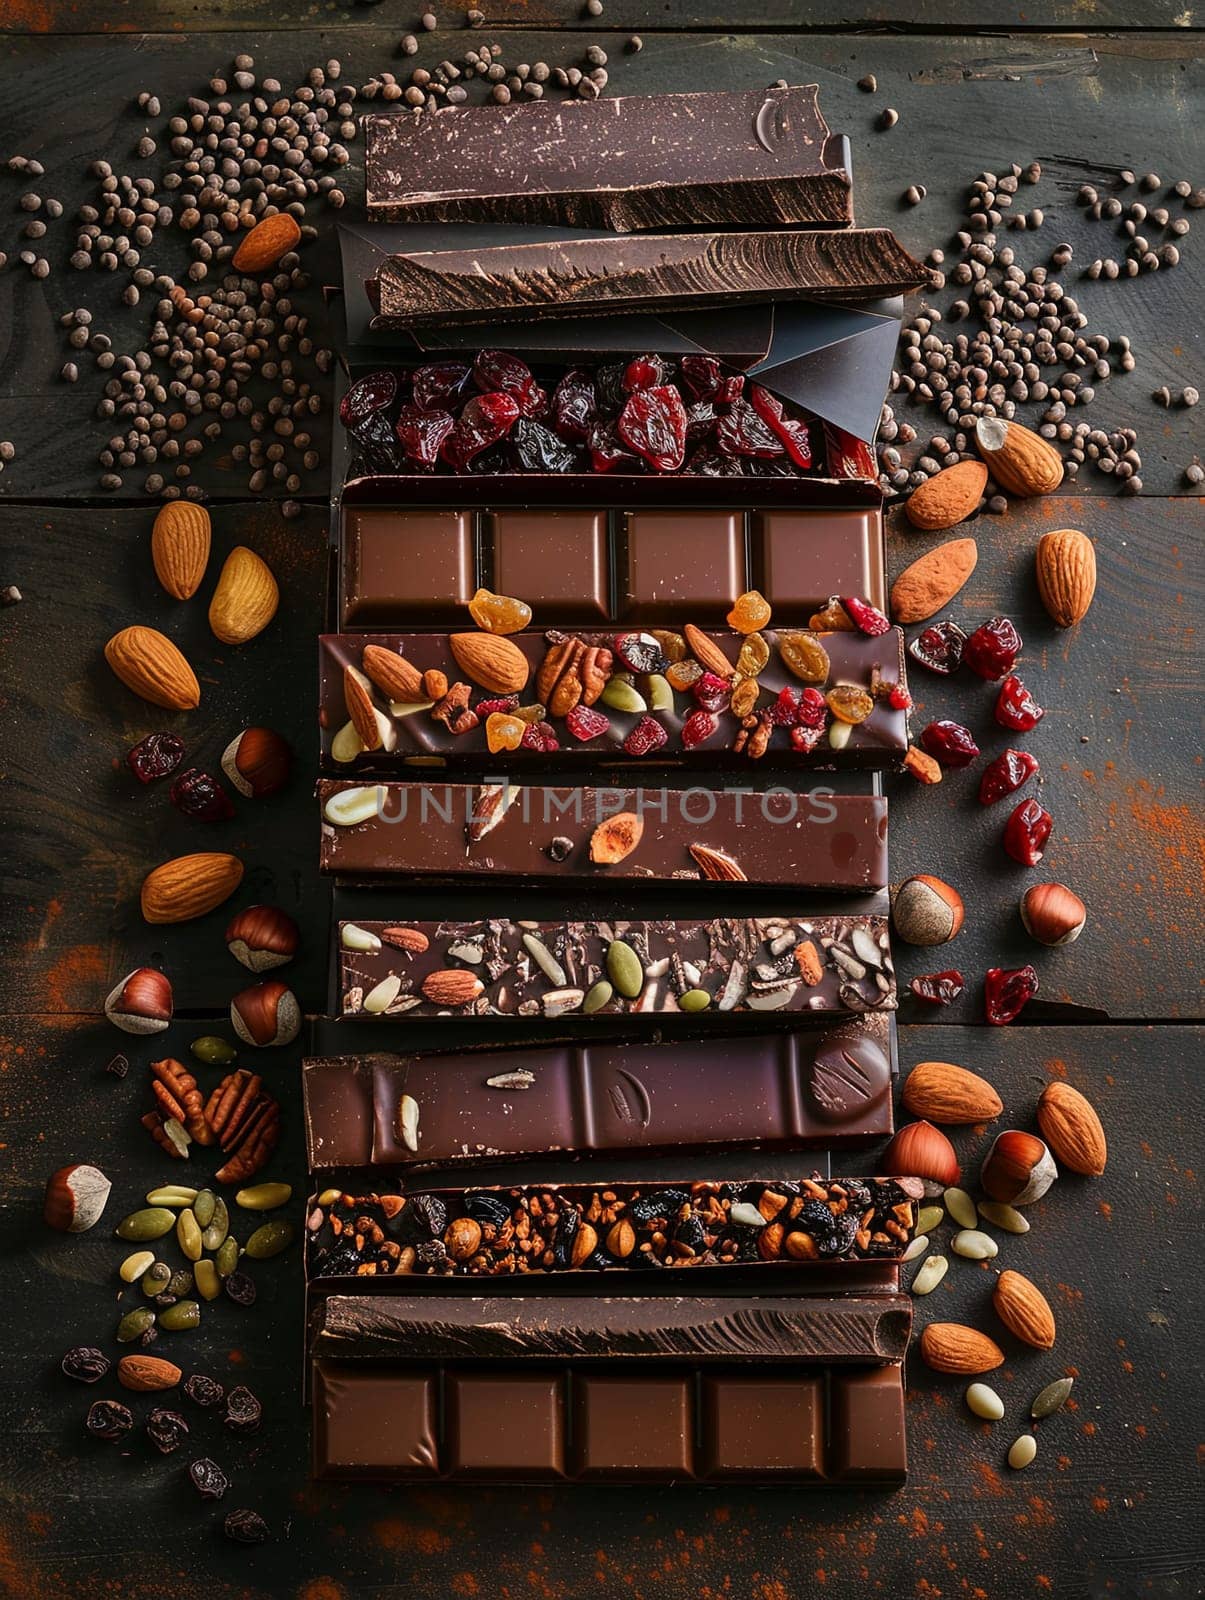 A detailed chocolate bar with nuts and chocolate arranged on a table, showcasing rich textures and natural ingredients.